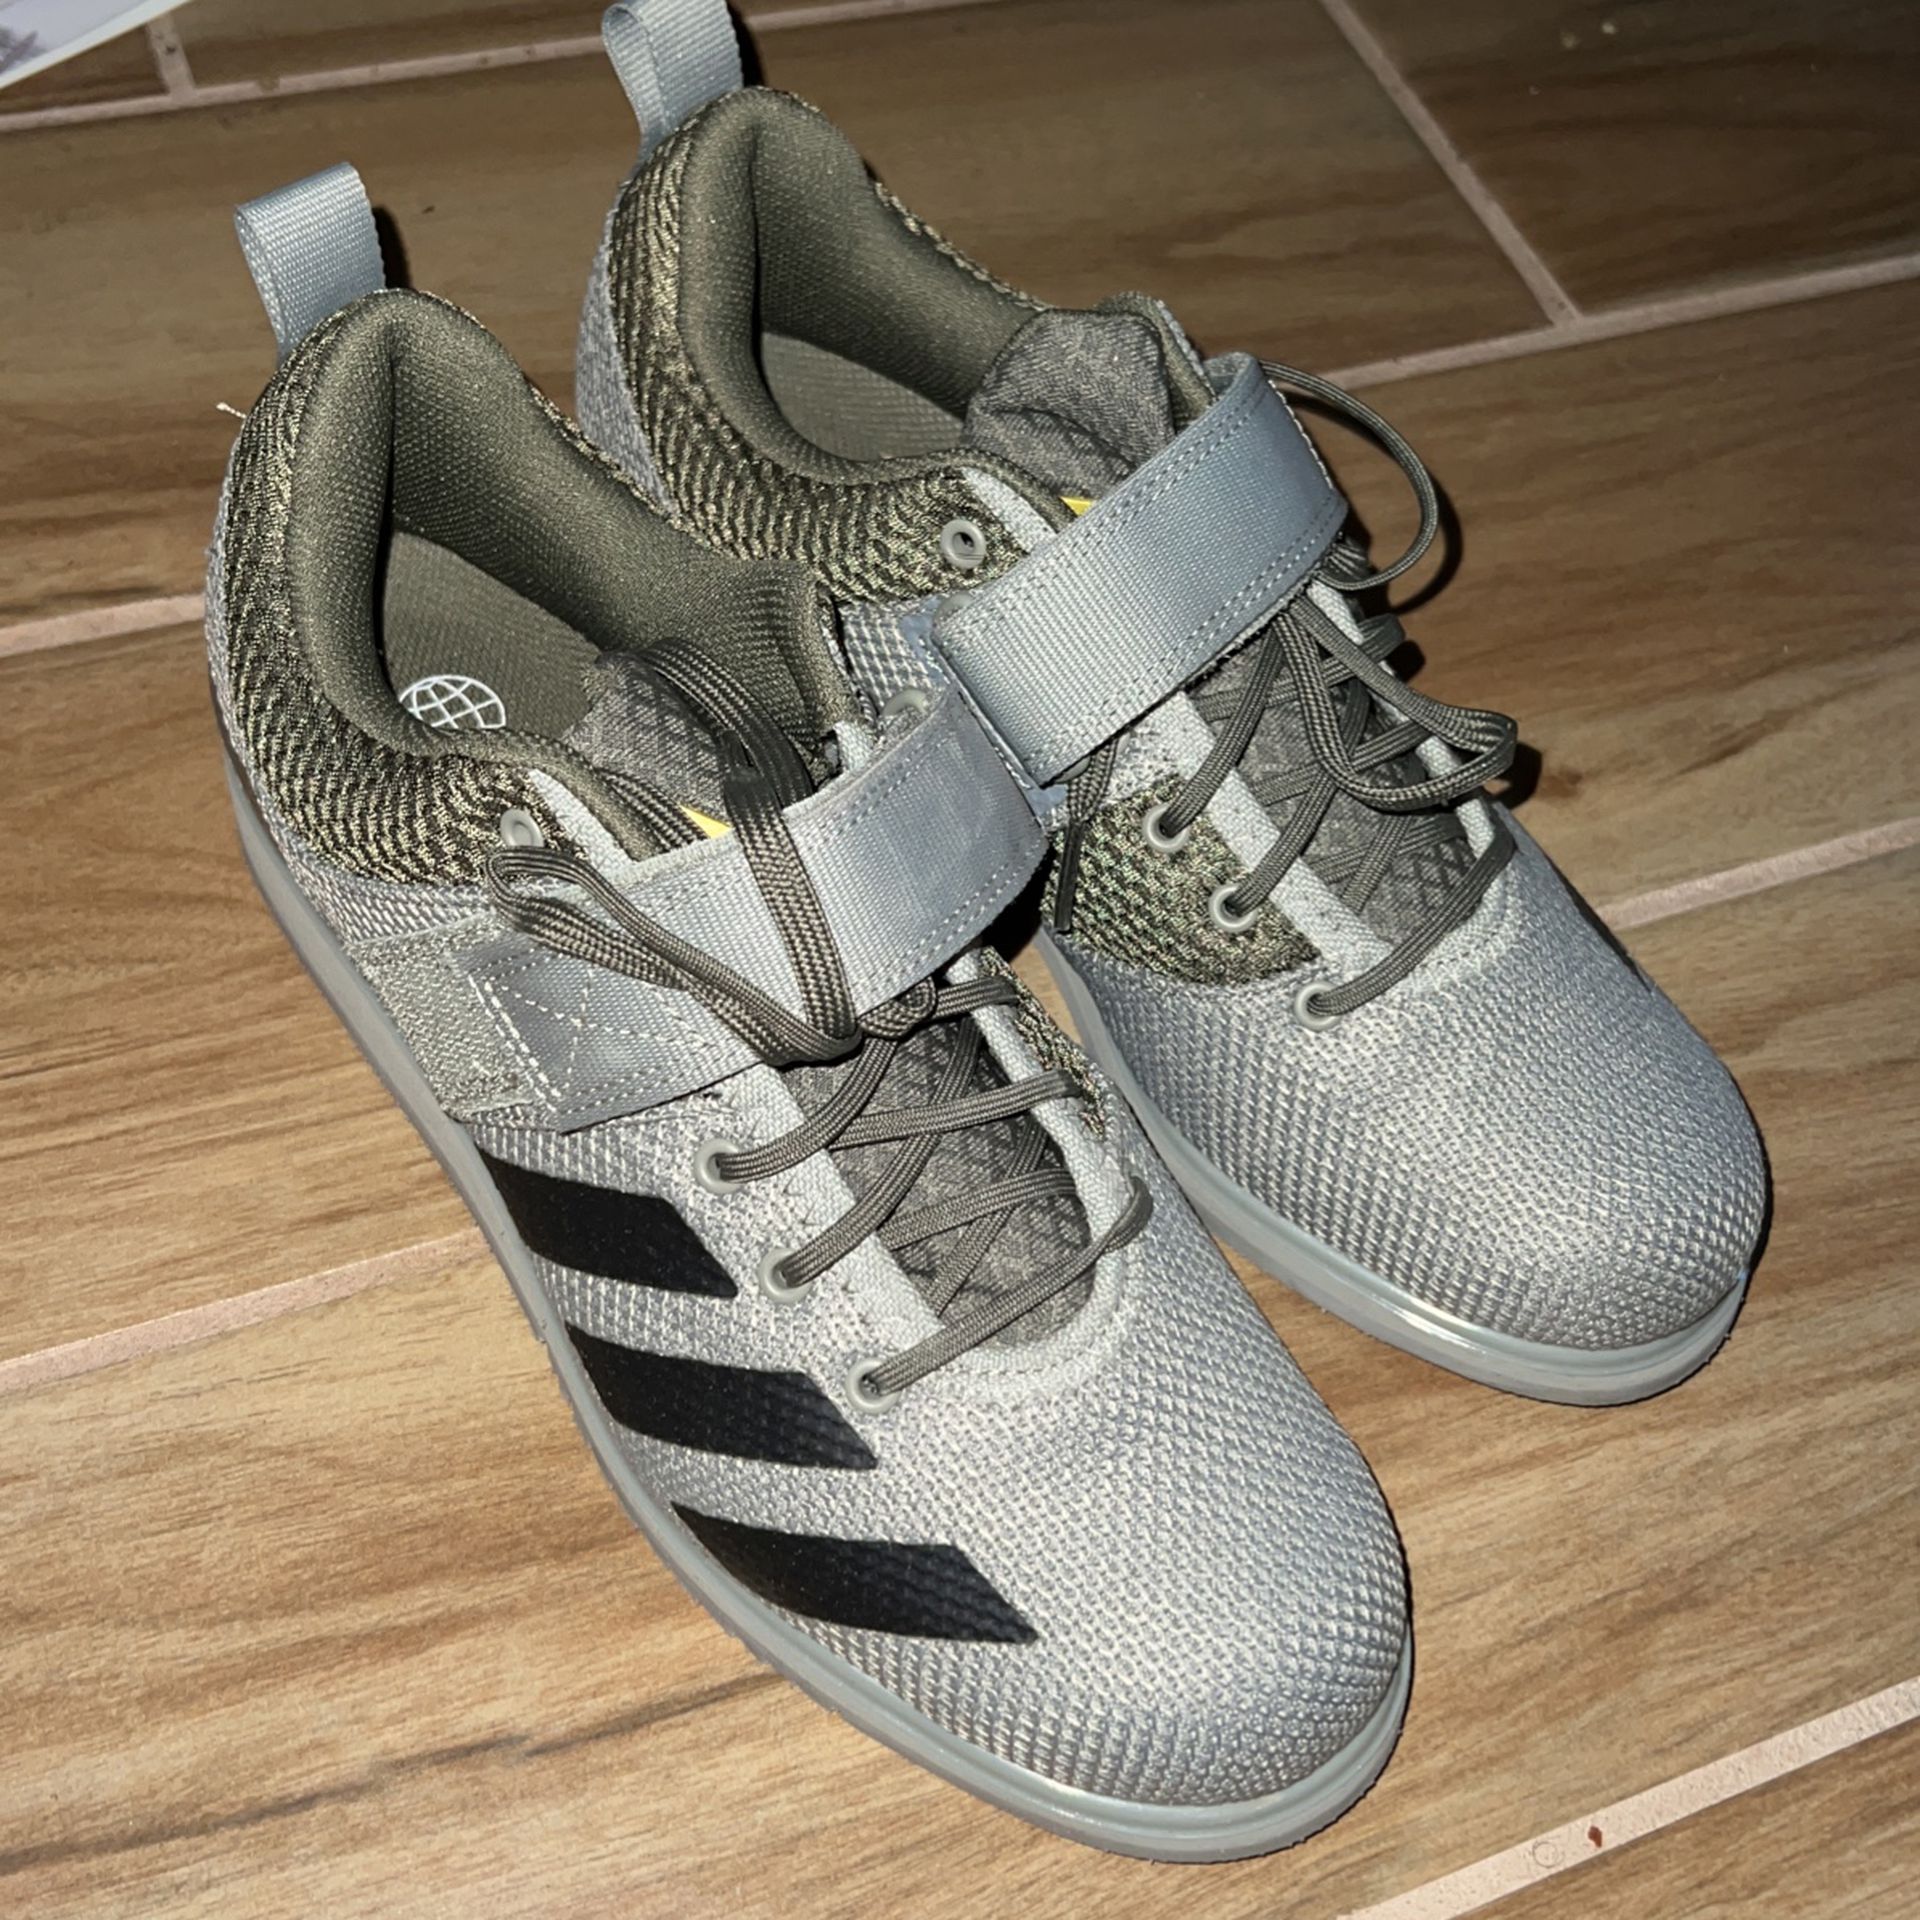 springvand romantisk tidligste Adidas Women's Power Lifting Shoes for Sale in Hayward, CA - OfferUp